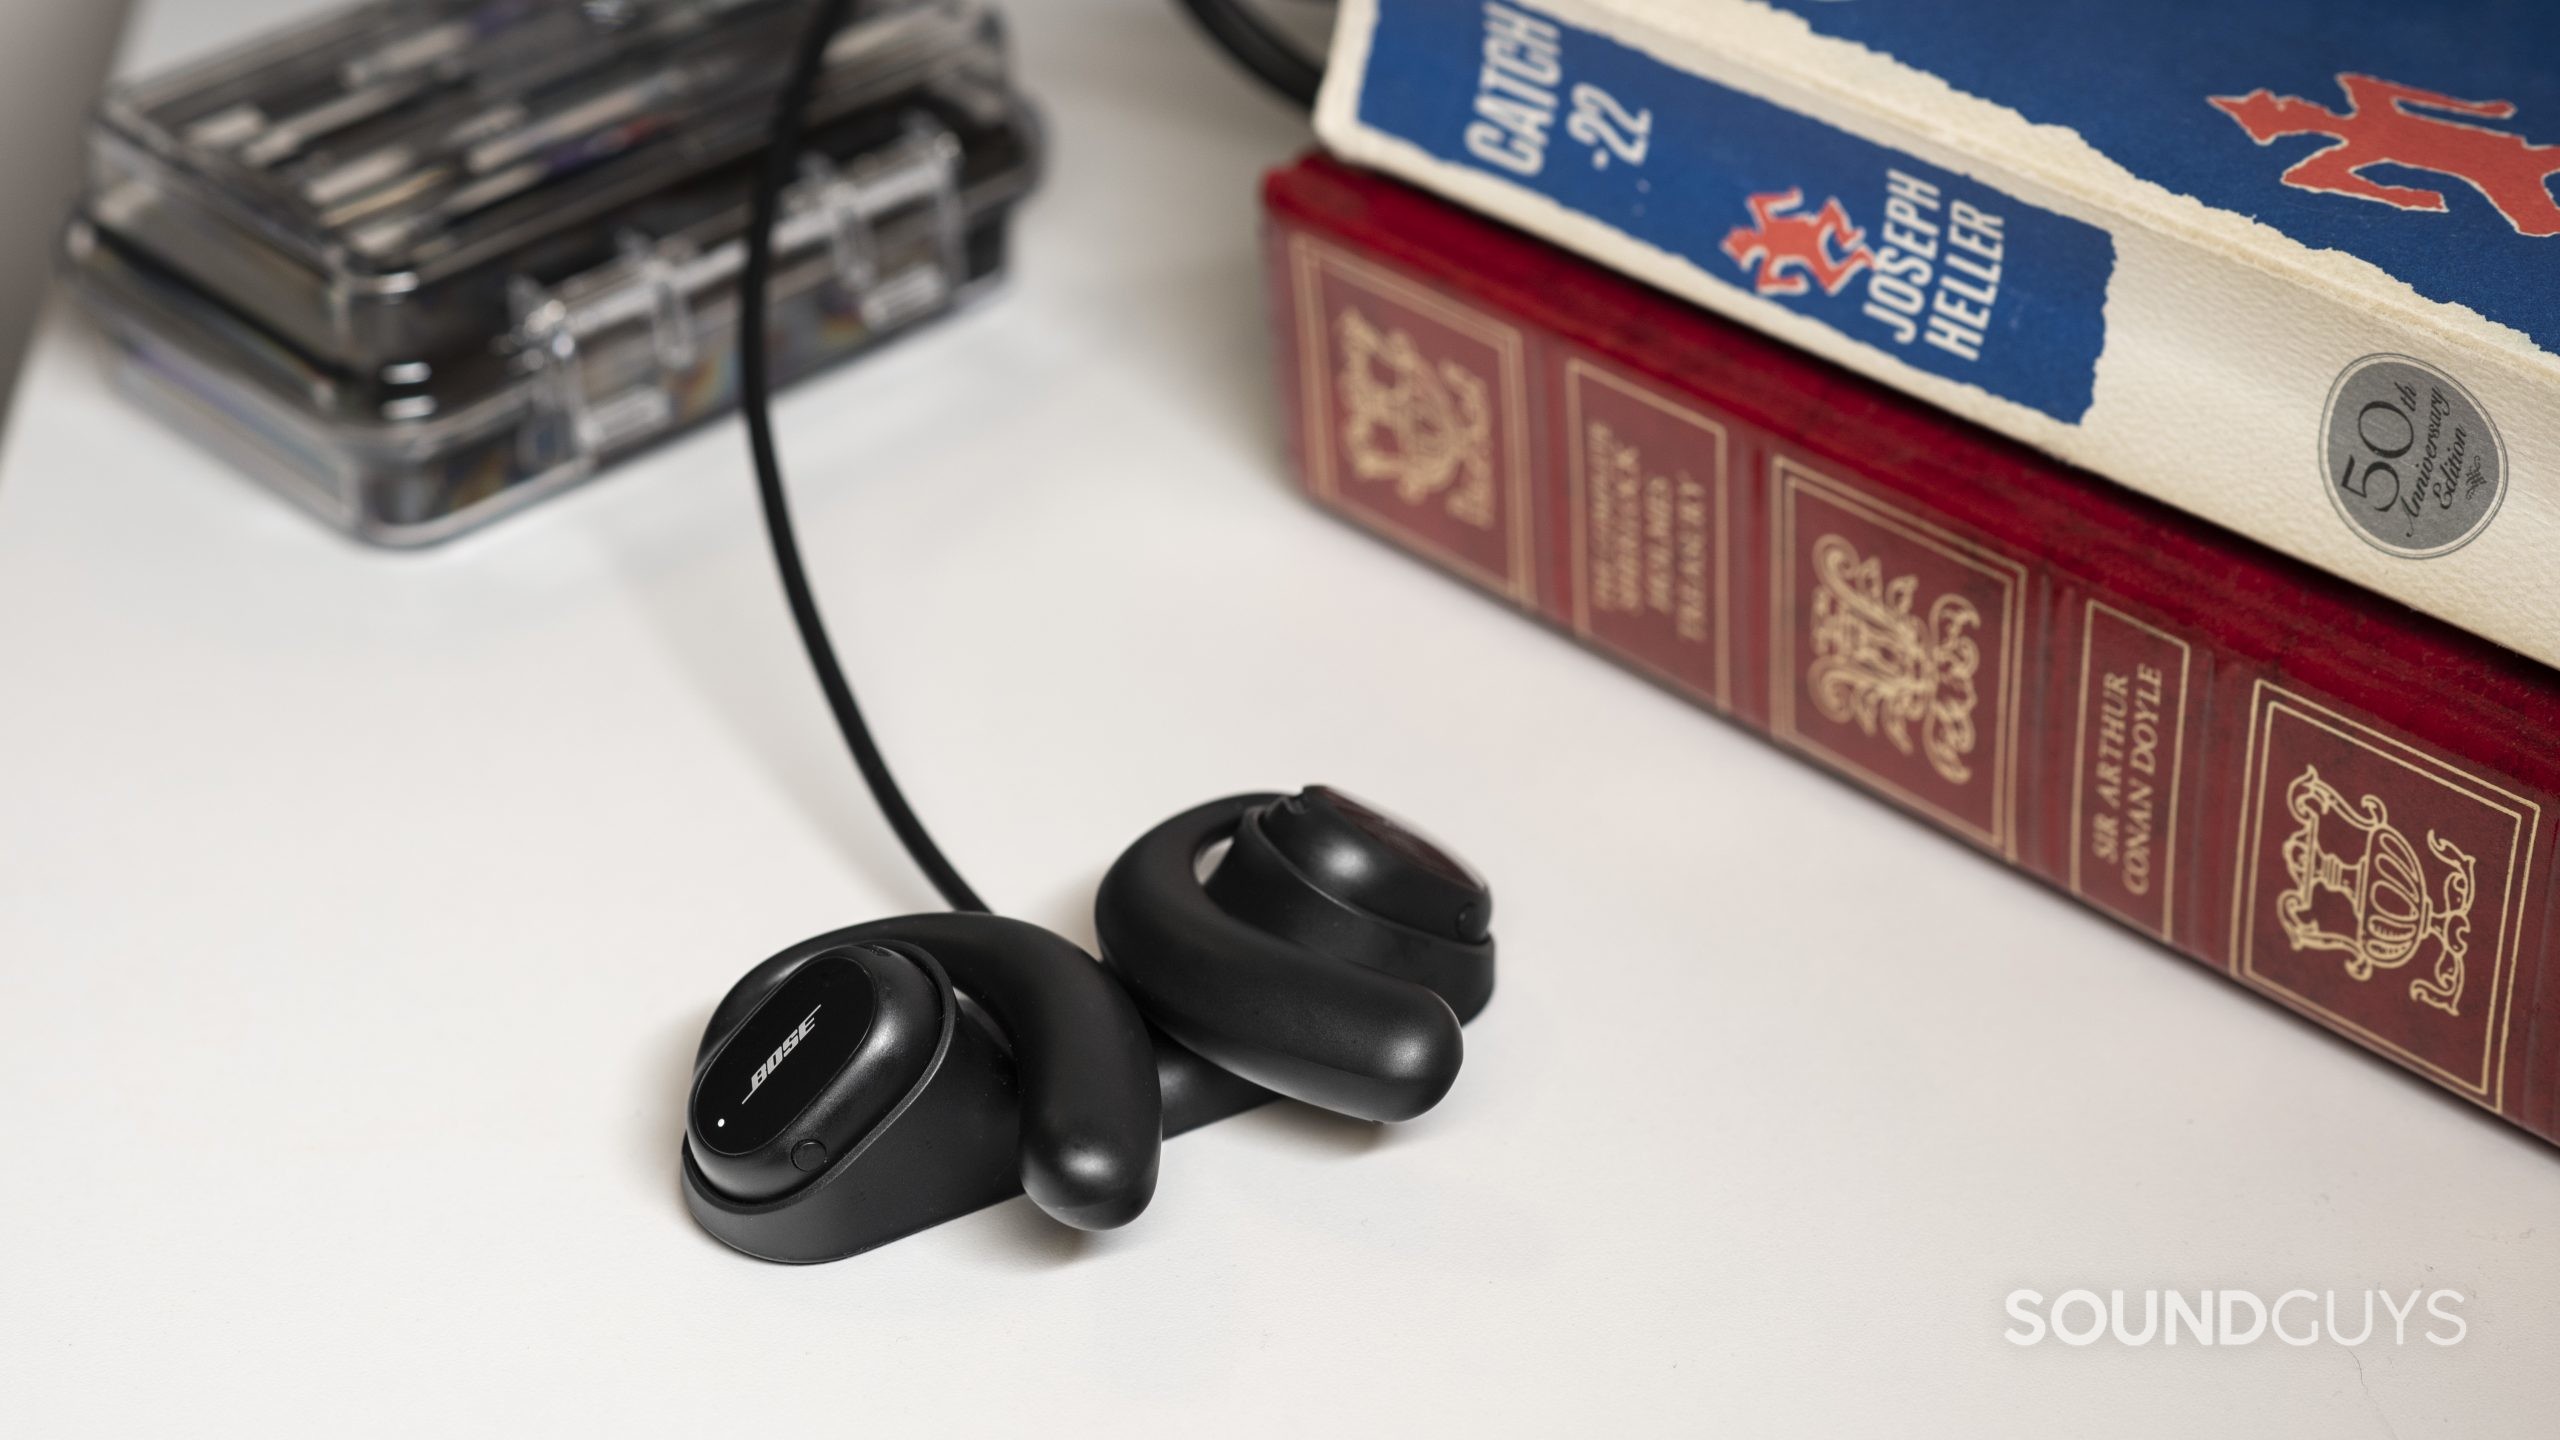 The Bose Sport Open Earbuds secured in the proprietary charging dock next to a stack of books.